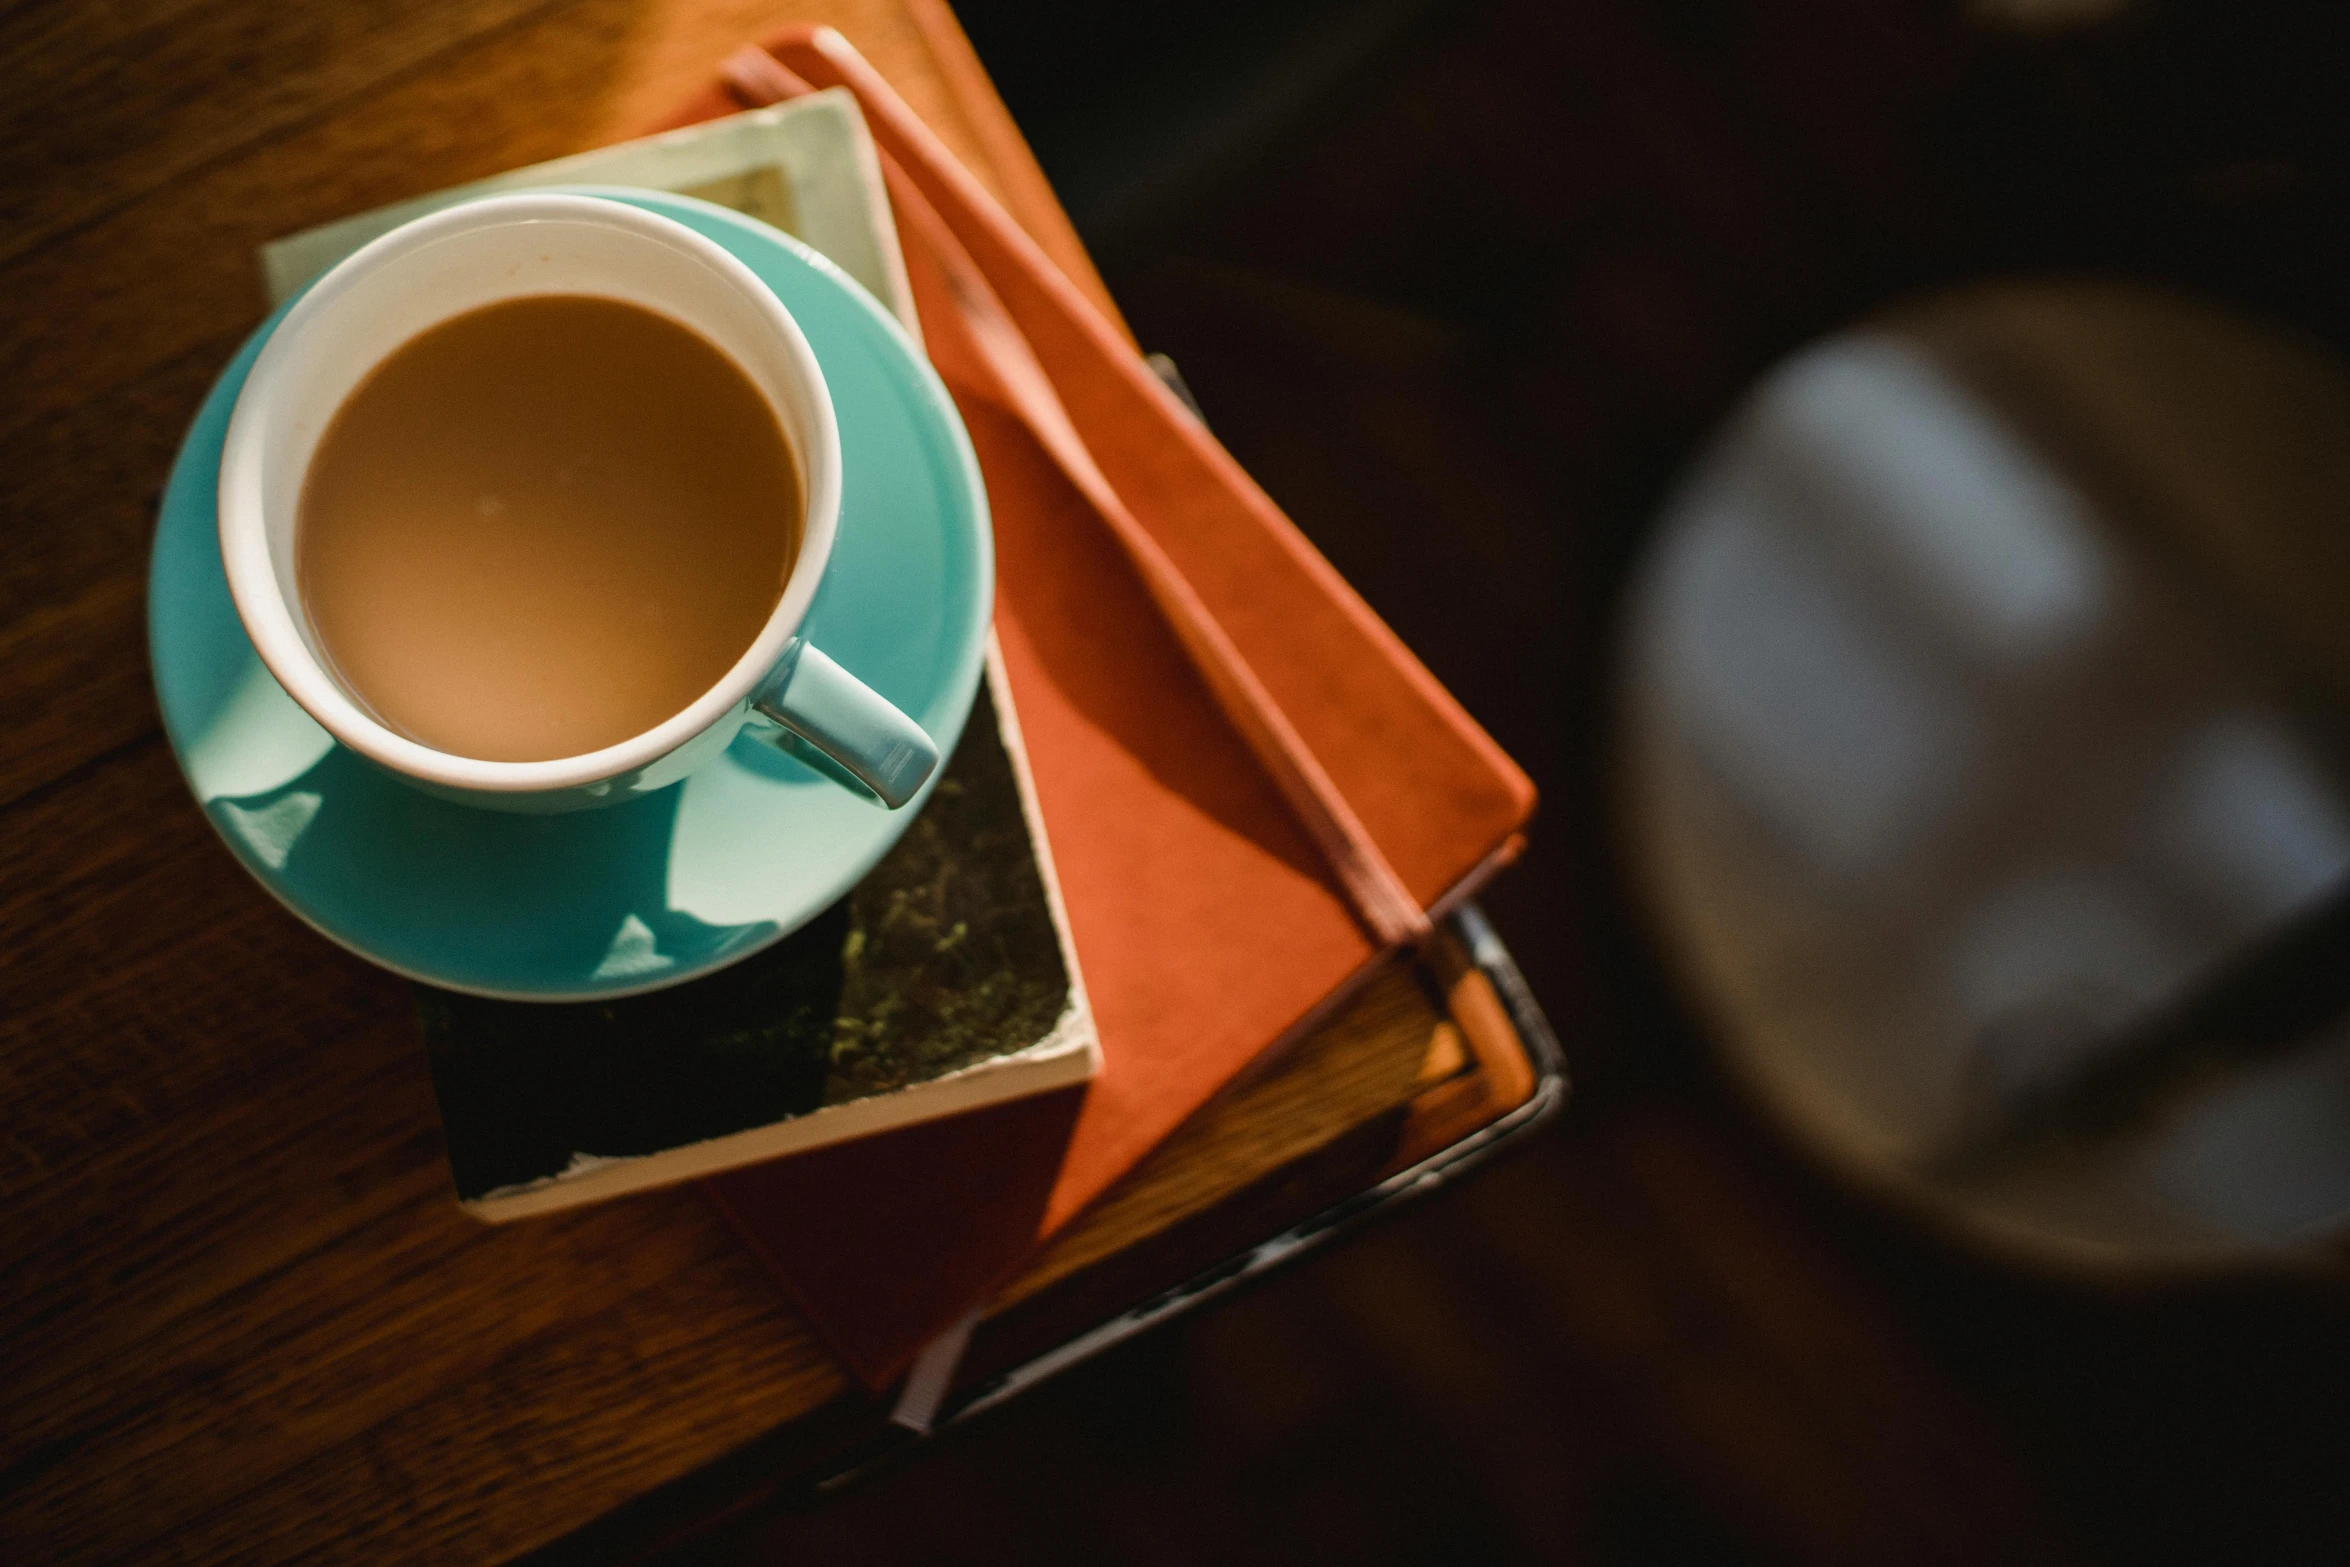 a cup of tea sitting on top of a stack of books, by Romain brook, trending on unsplash, sitting on a mocha-colored table, orange and teal color, high angle close up shot, 15081959 21121991 01012000 4k